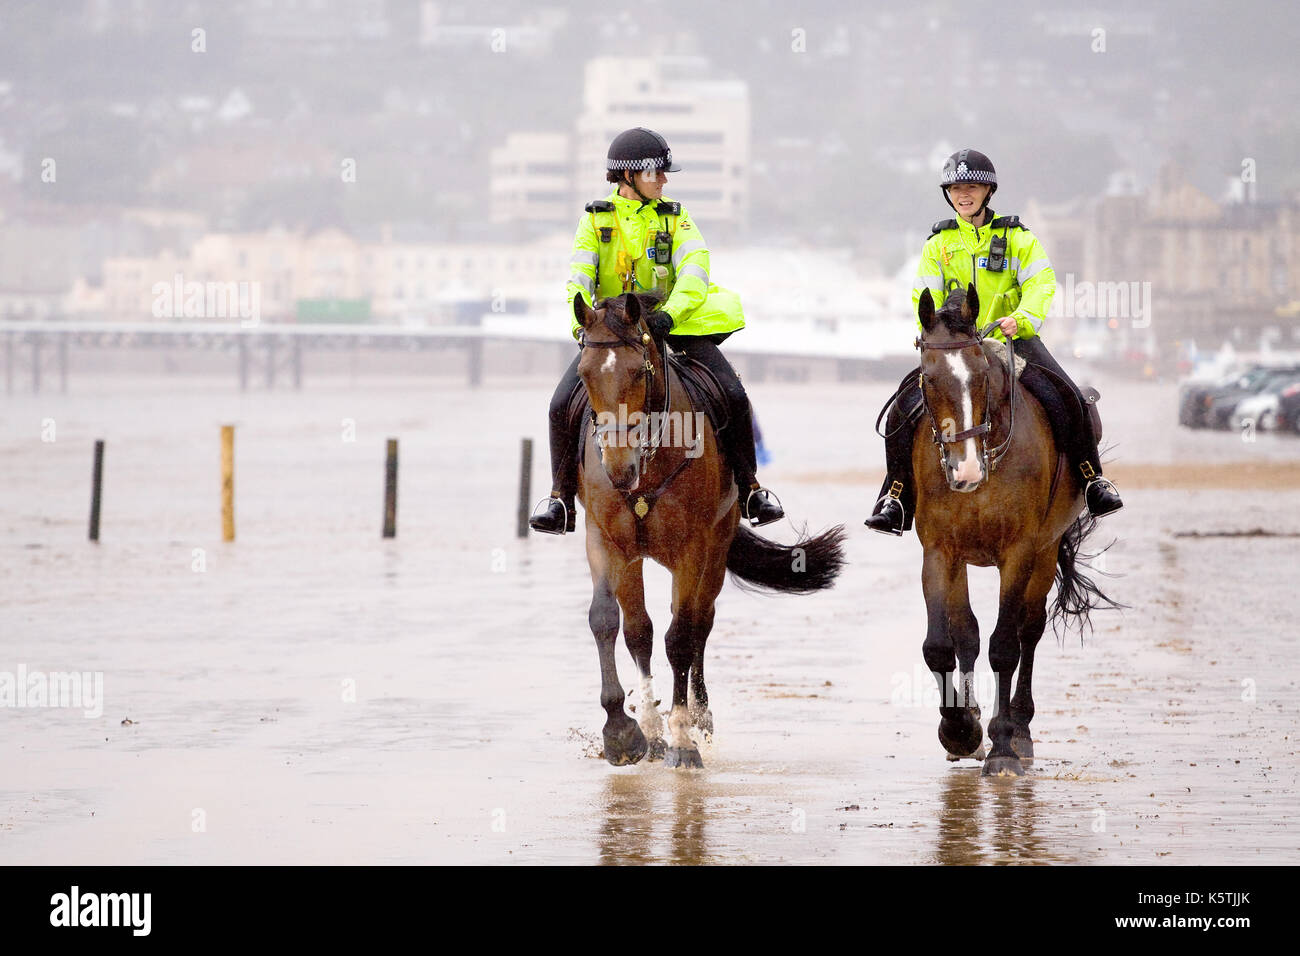 Two Mouned Police Woman, on patrol,  in fluorescent uniforms riding.their Police Horses along a beach in wet windy weather. Stock Photo